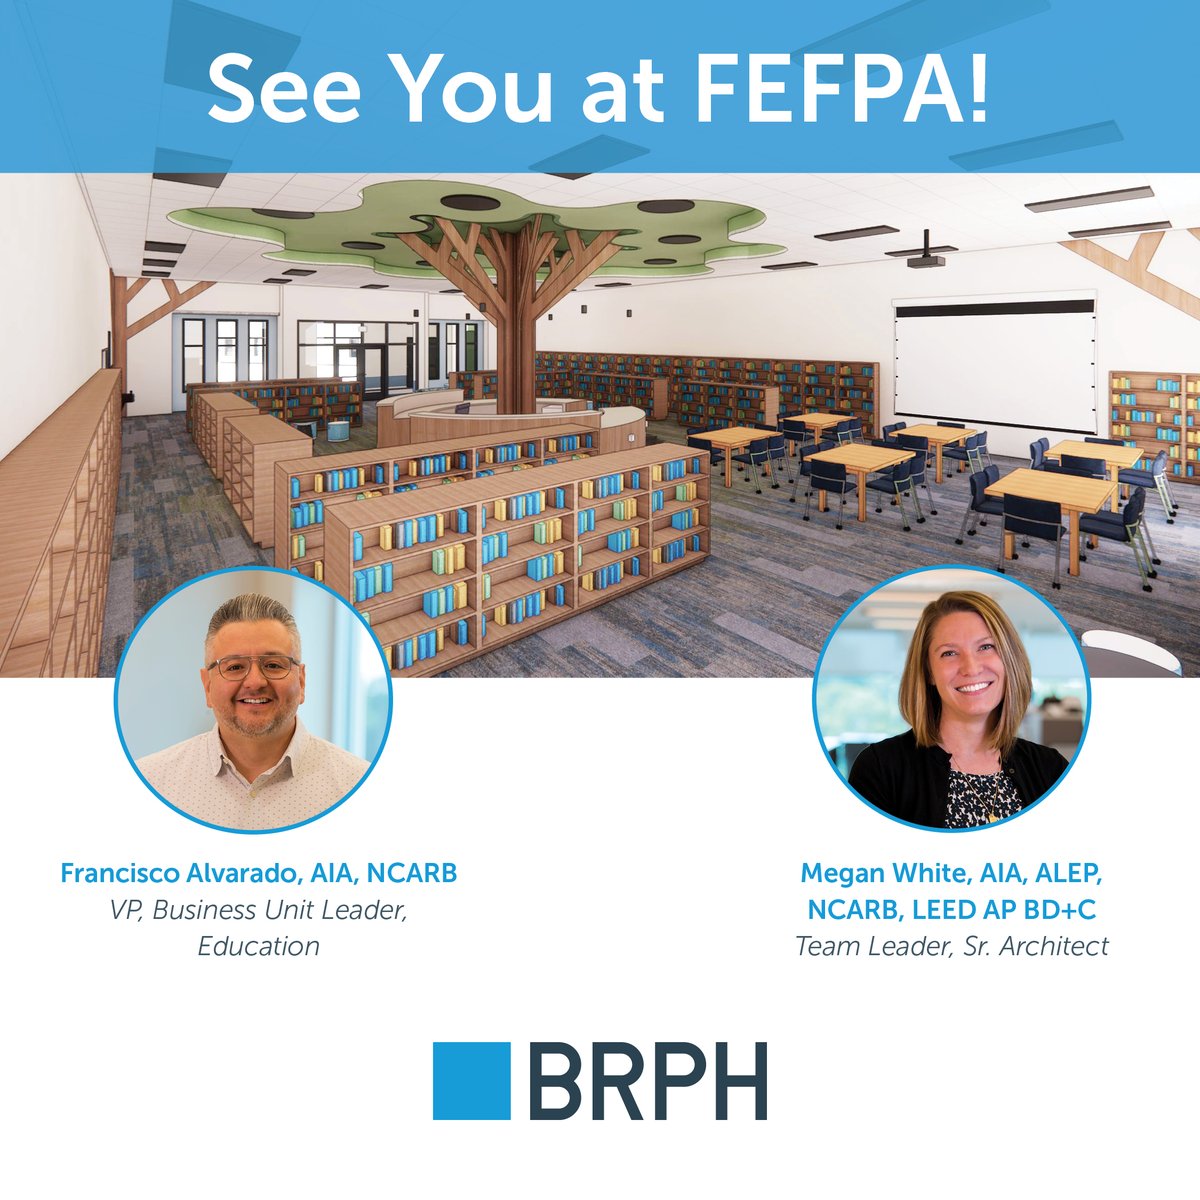 Educators, we hope to see you at #FEFPA next week!  Visit us at booths 213/312 or connect with us online to see how we're helping facilities like yours prepare students for their future.

#k12design #studentcentereddesign #fefpasummer2023 #educationdesign #schooldesign